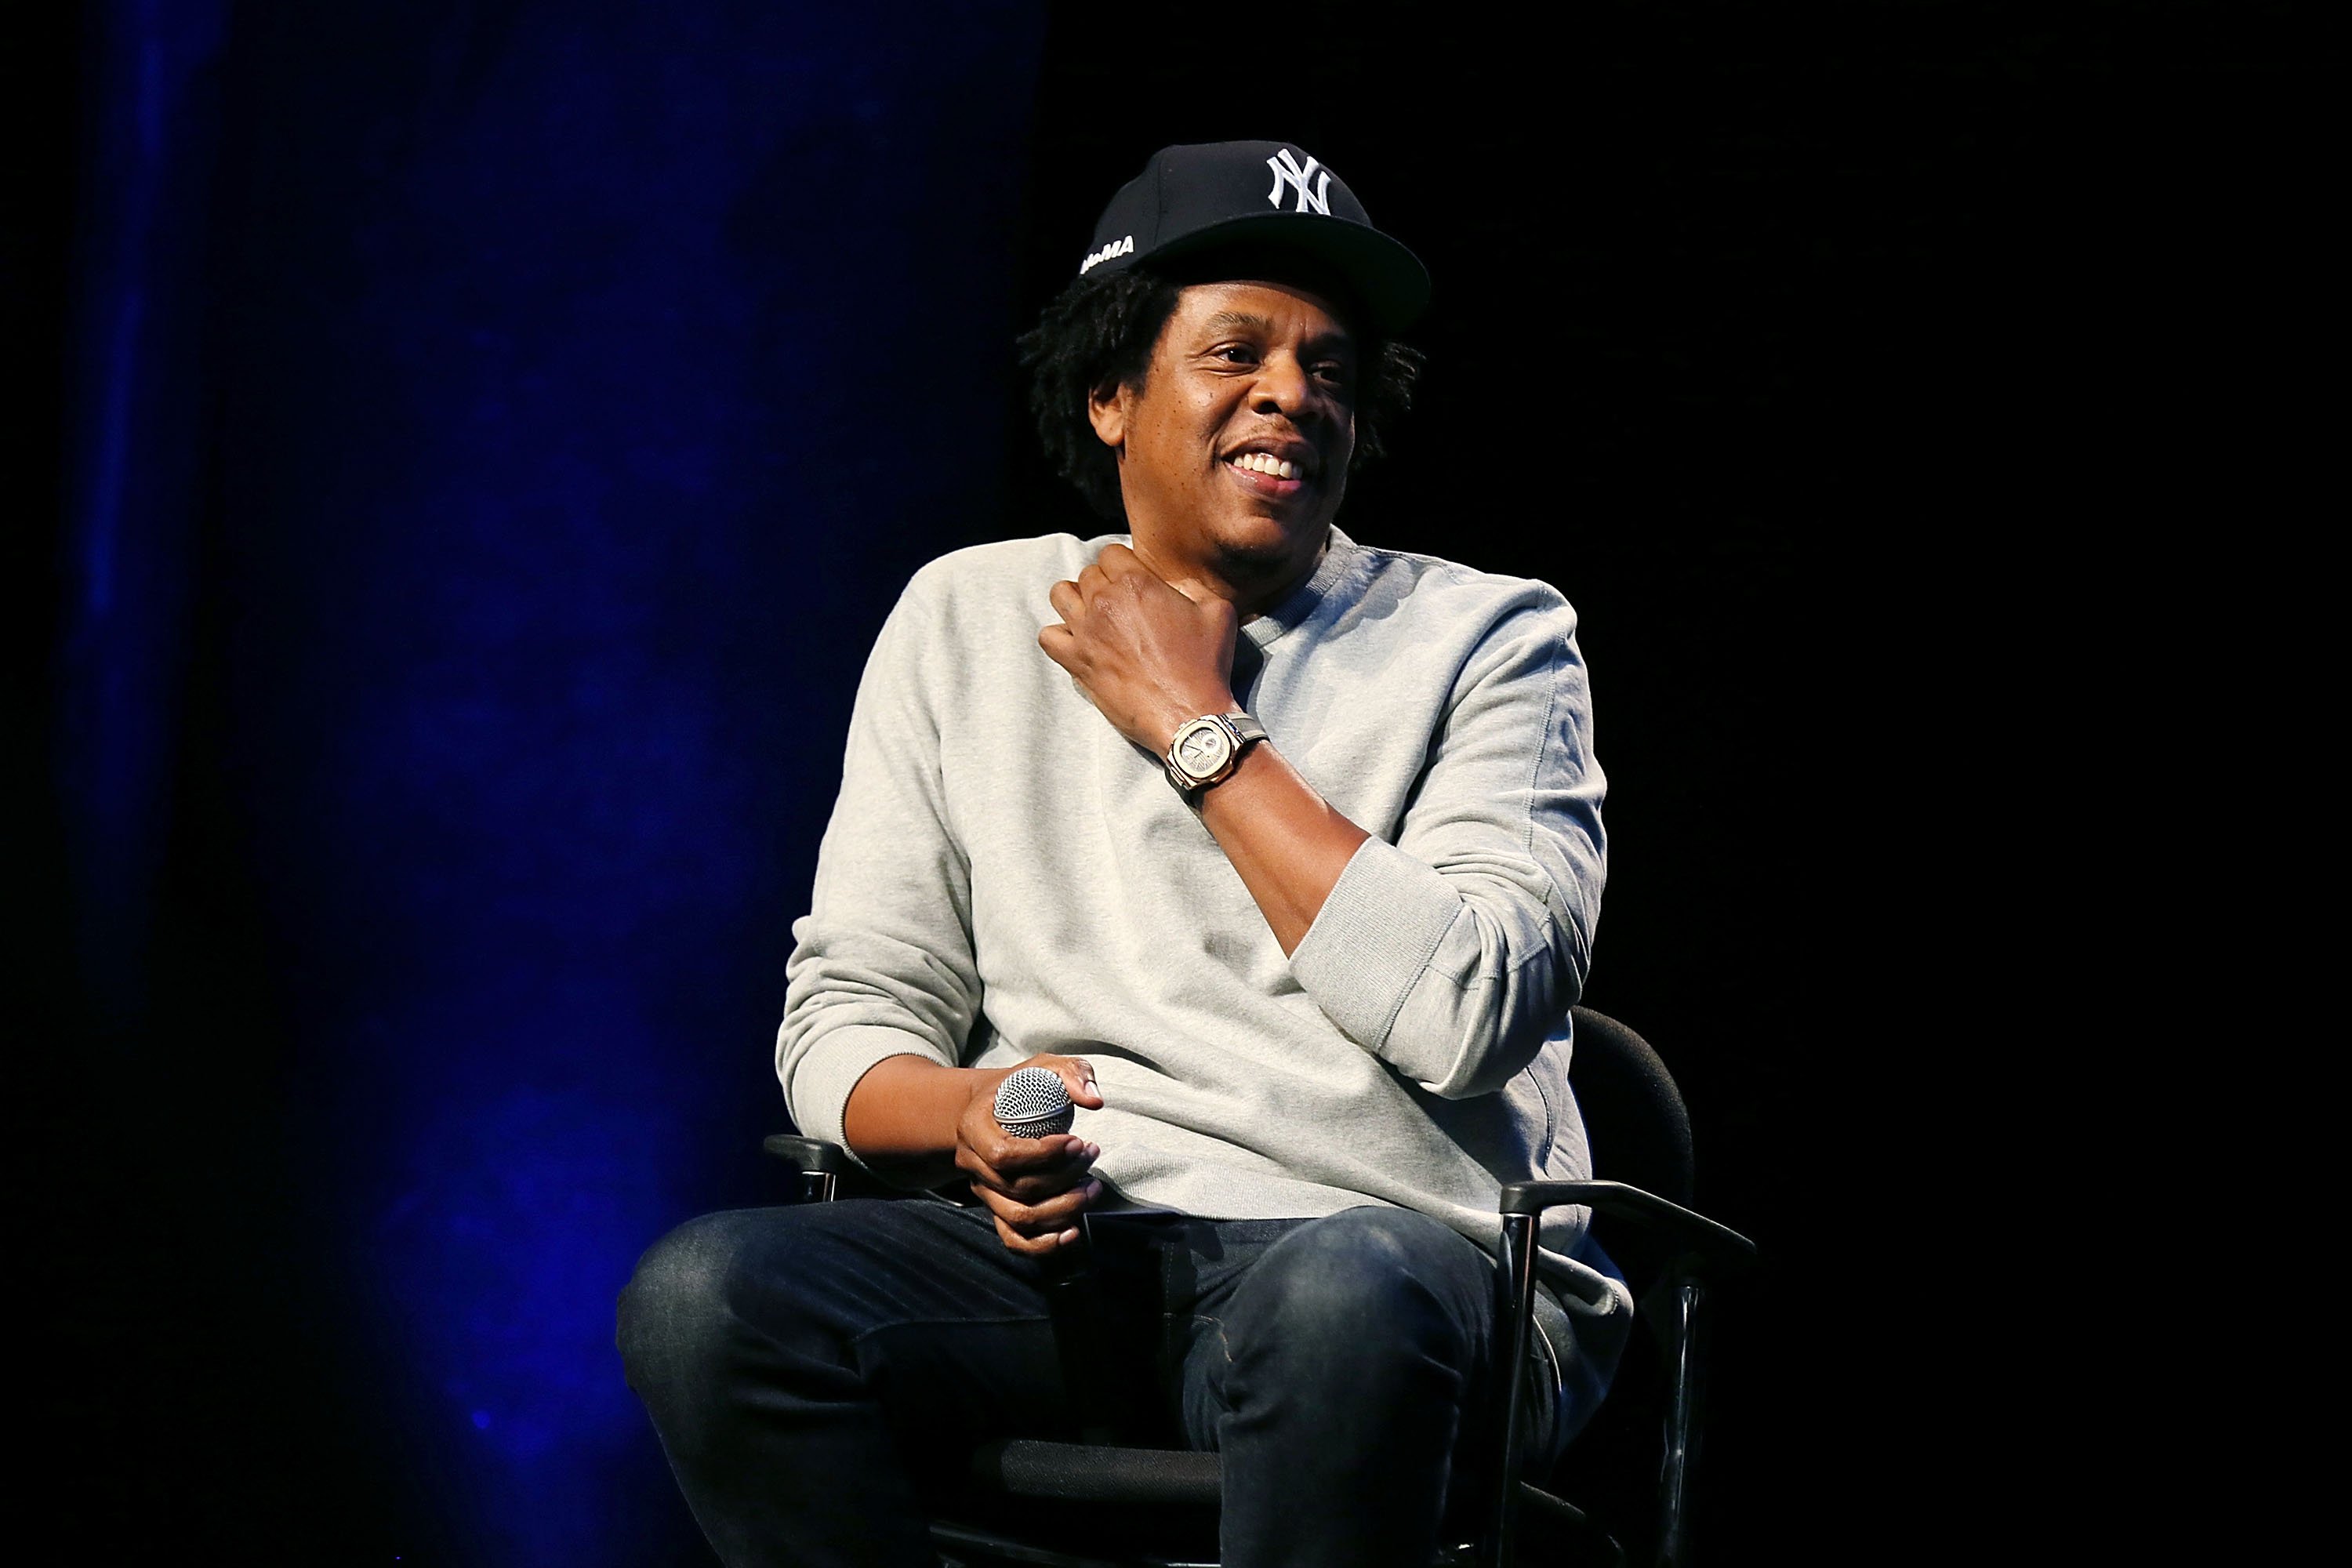 Jay-Z attending the Criminal Justice Reform Organization Launch at the Gerald W. Lynch Theater in New York City on January 23, 2019. | Photo: Getty Images